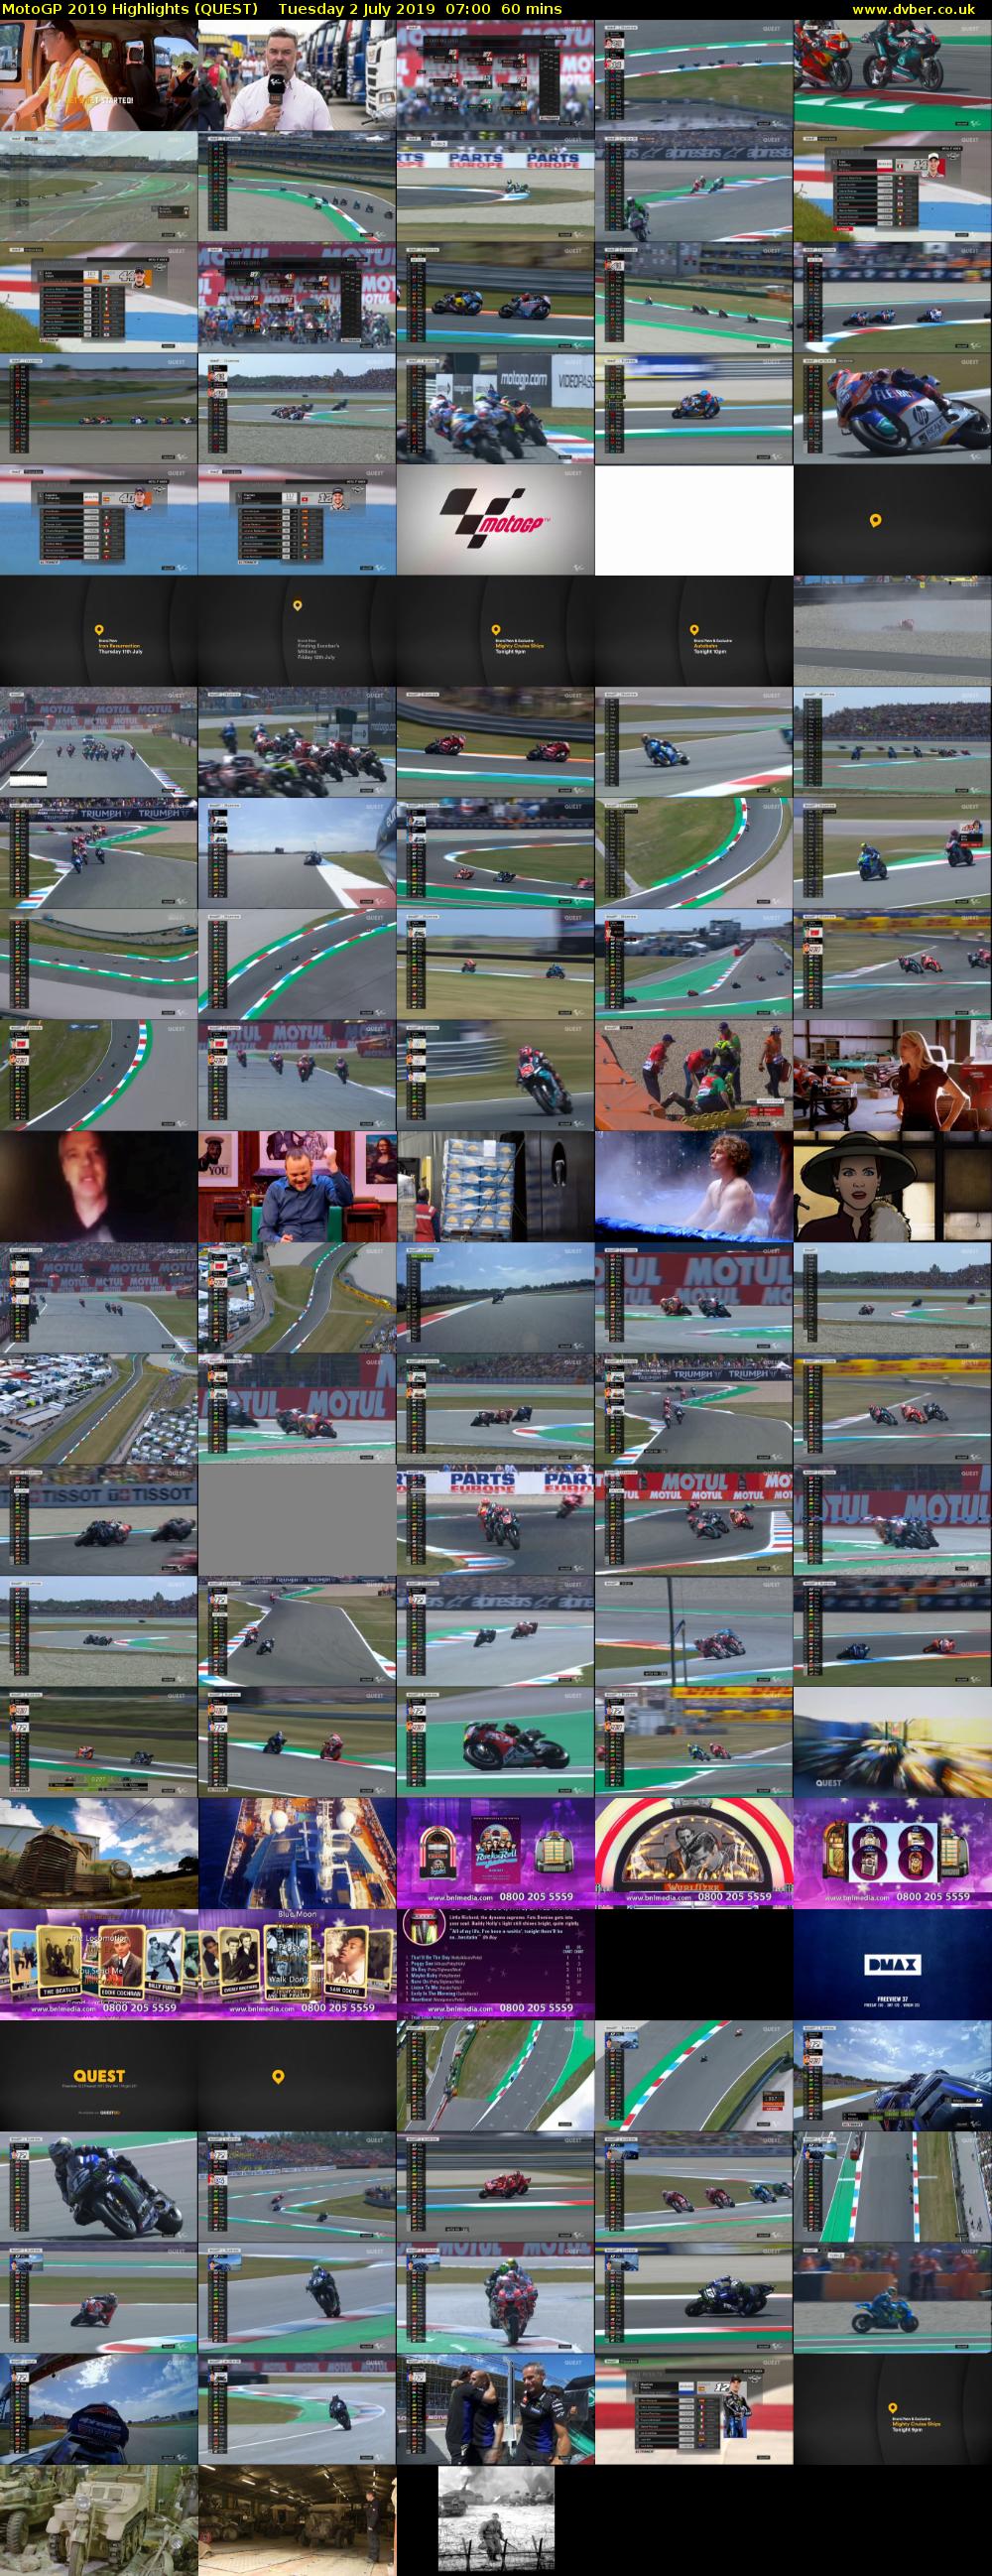 MotoGP 2019 Highlights (QUEST) Tuesday 2 July 2019 07:00 - 08:00